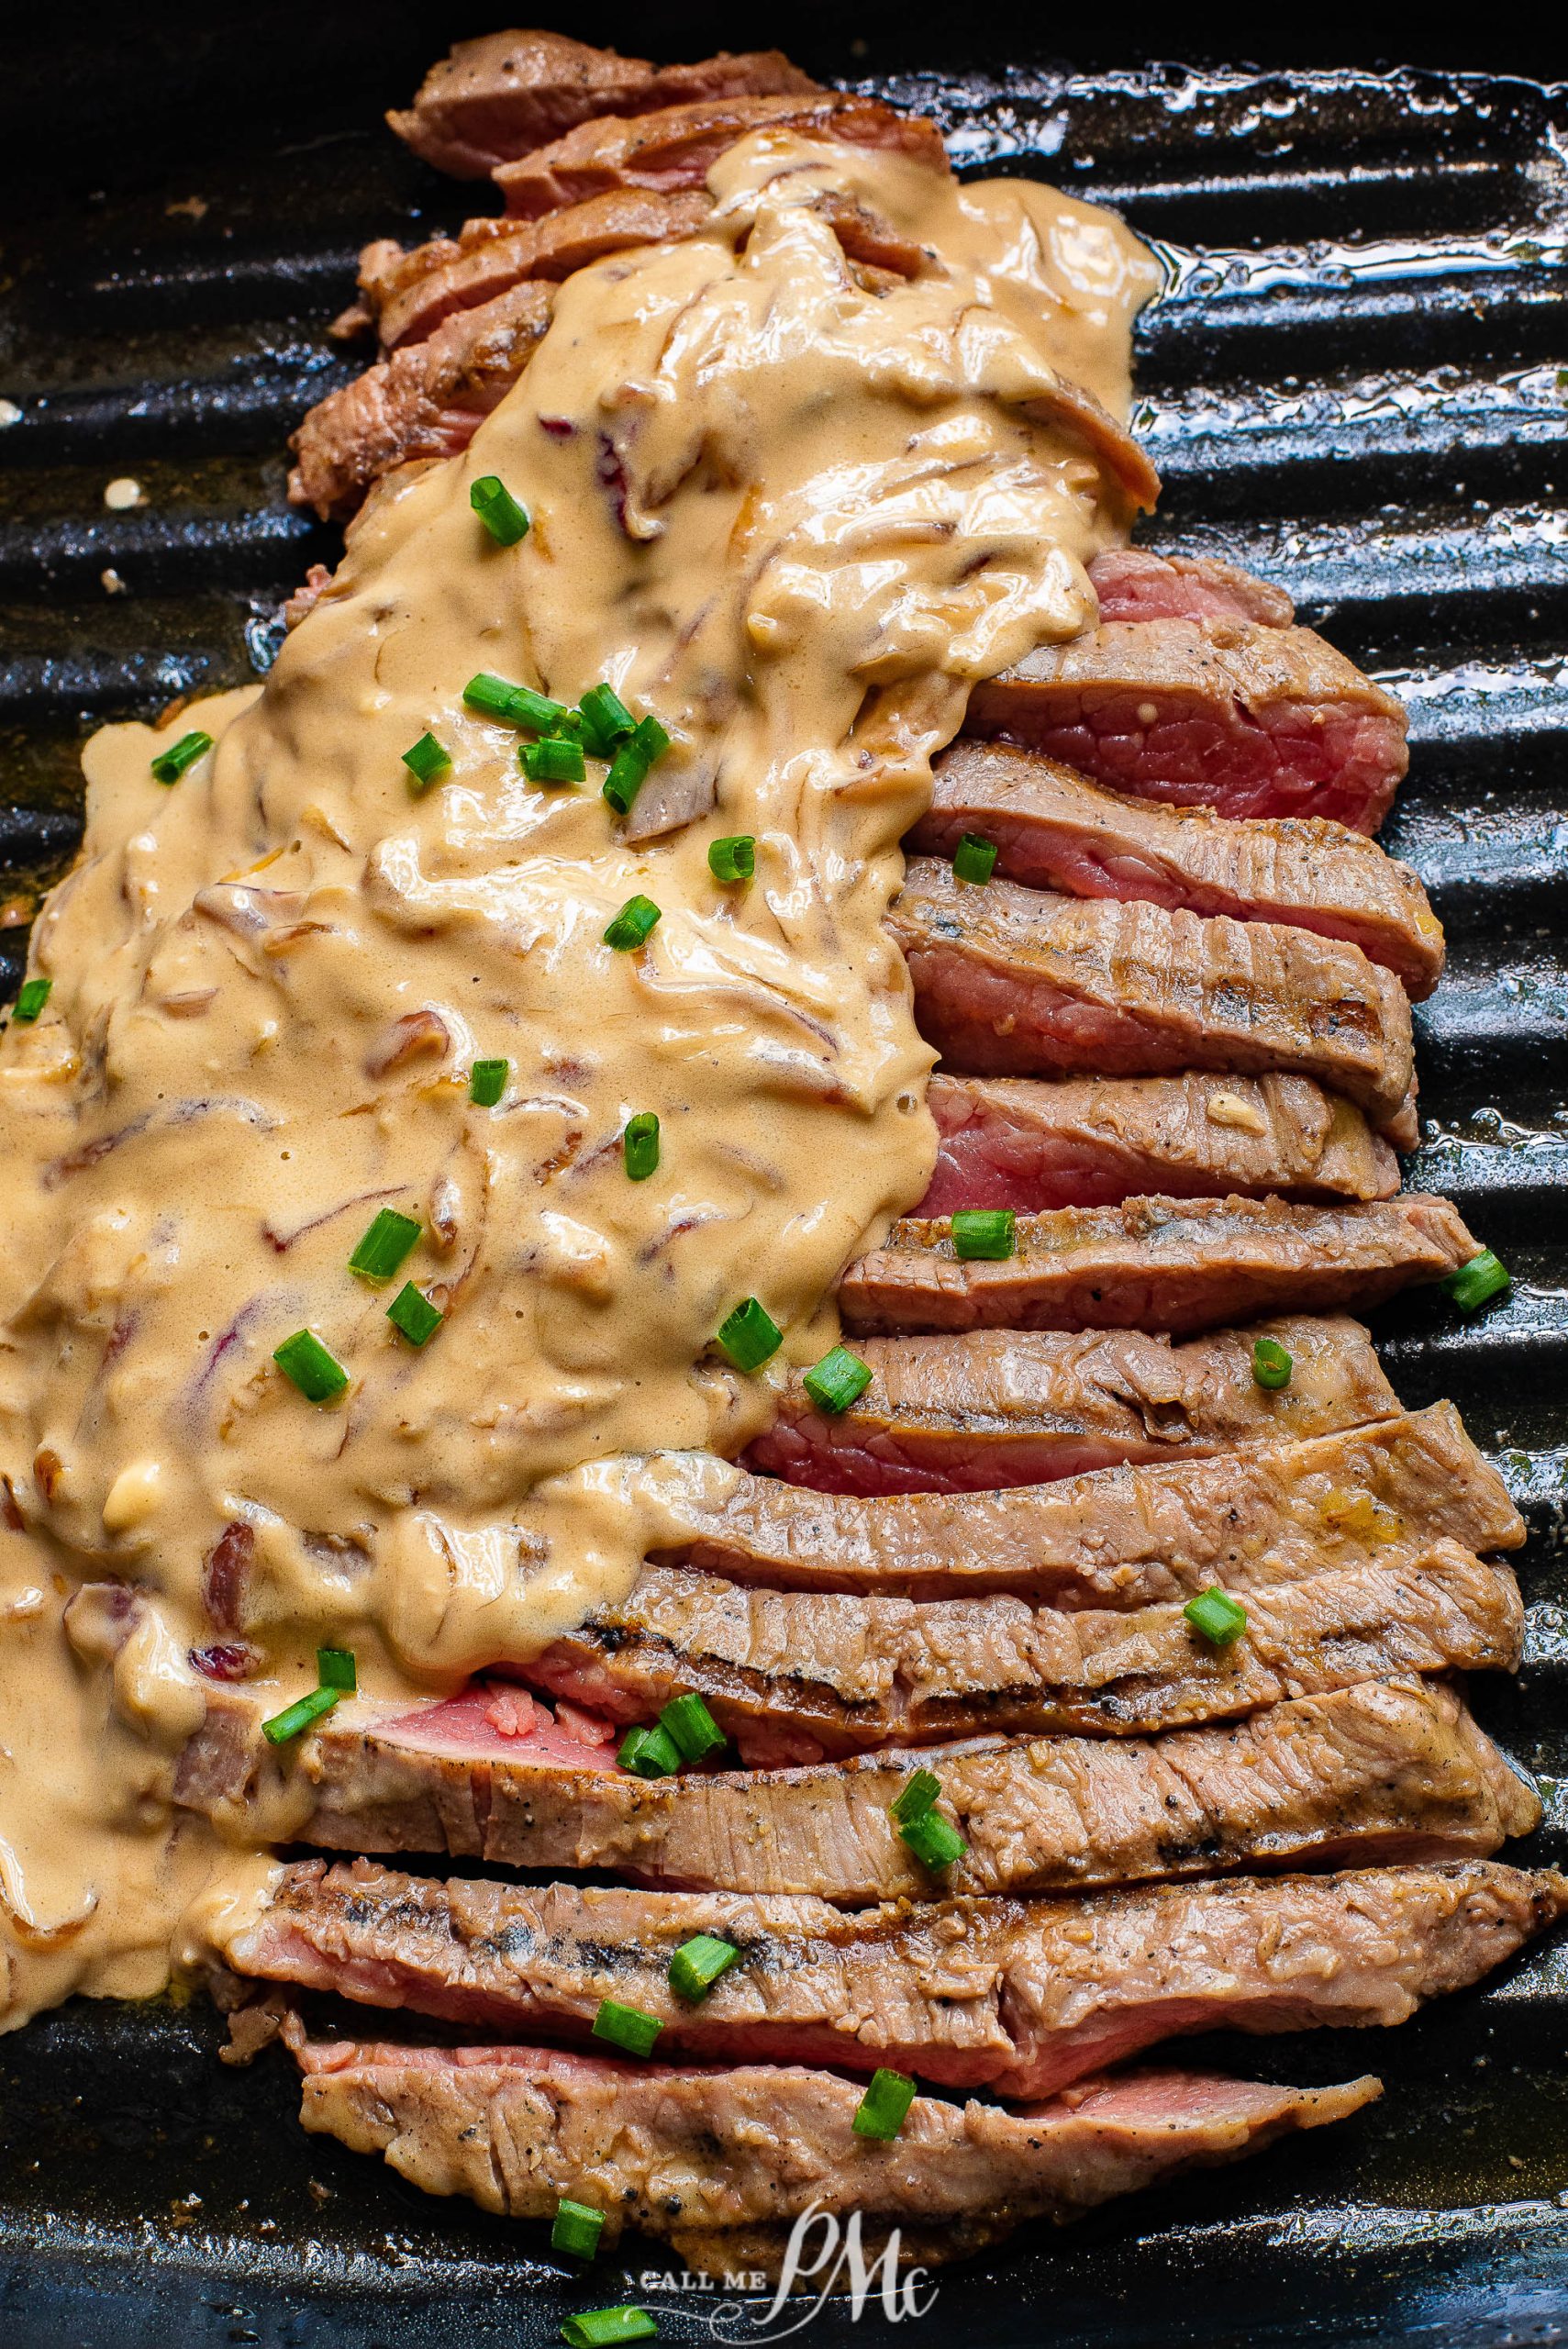 Ribeye with Feta Gravy. A steak on a grill with a sauce on it.